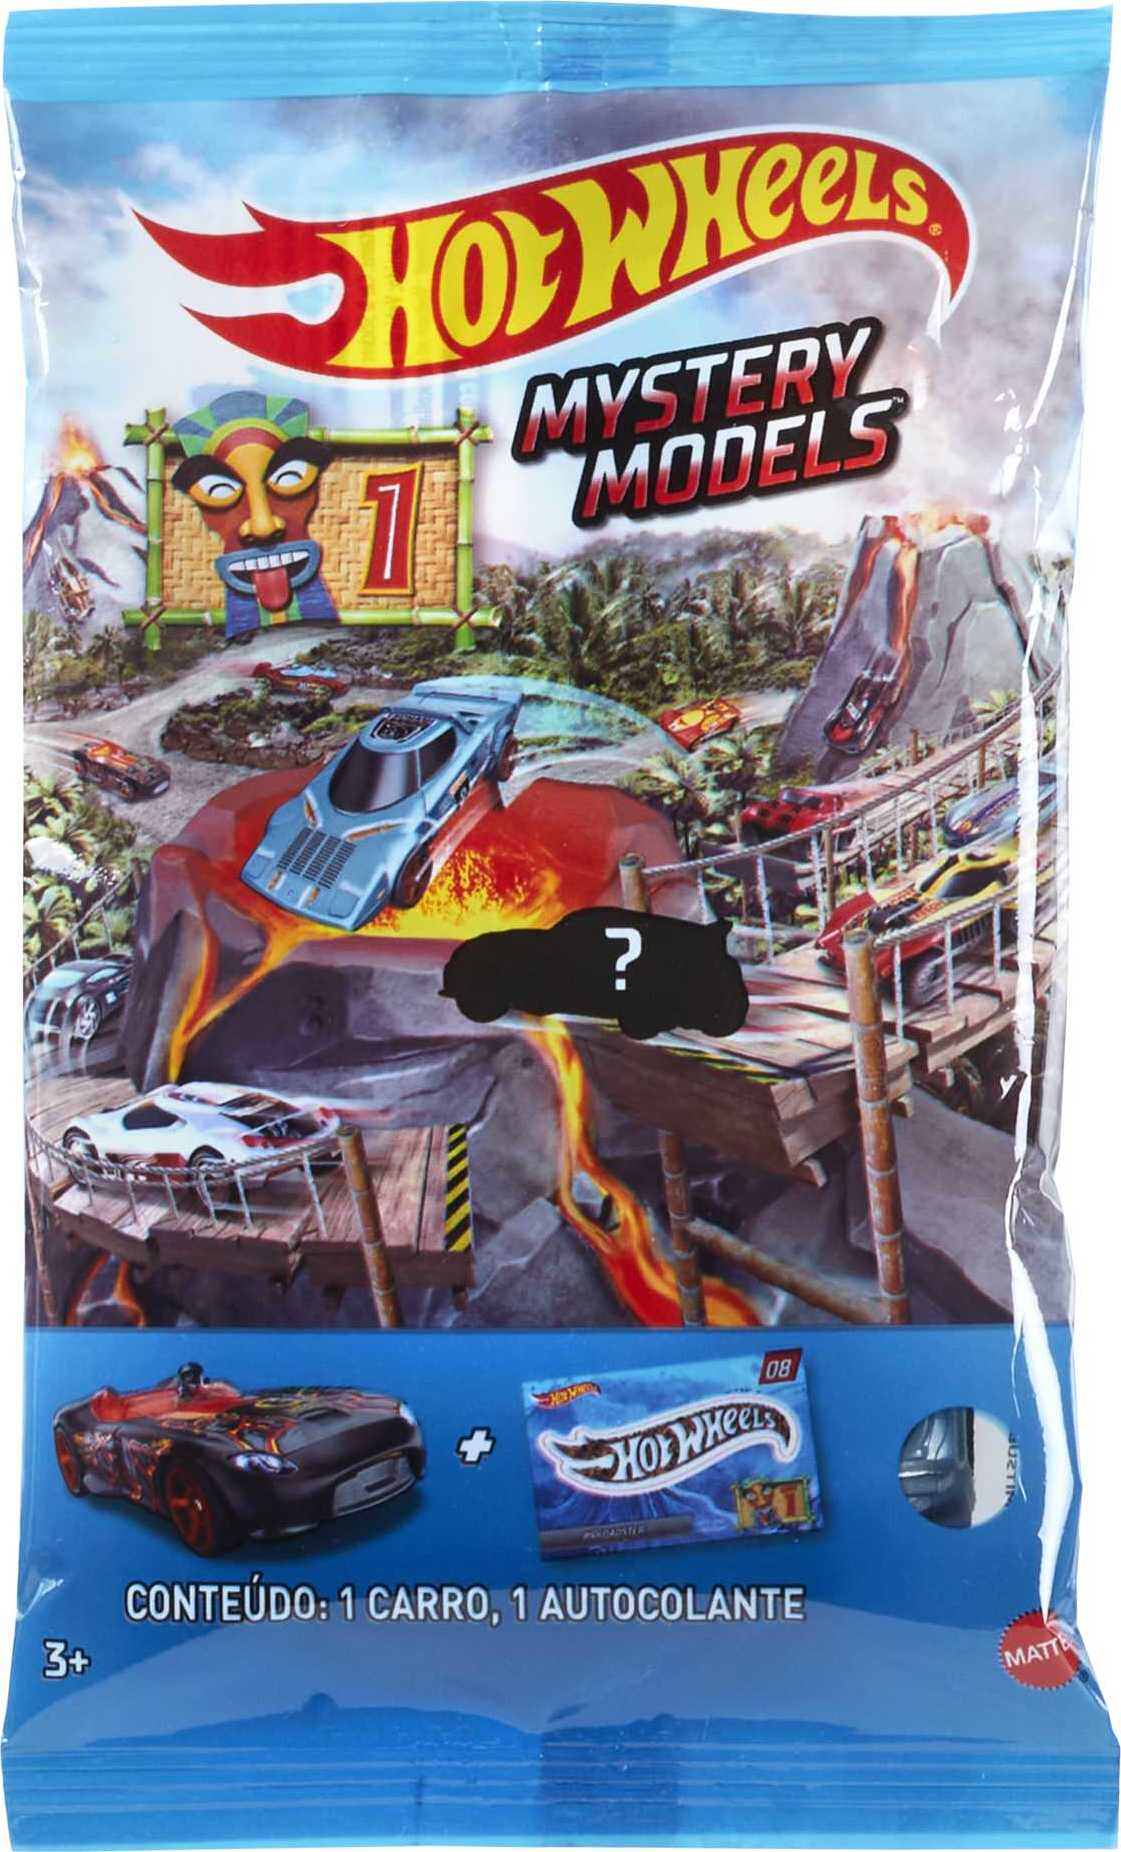 Hot Wheels Mystery Models Surprise Toy Car or Truck in 1:64 Scale (Styles May Vary) - image 1 of 6